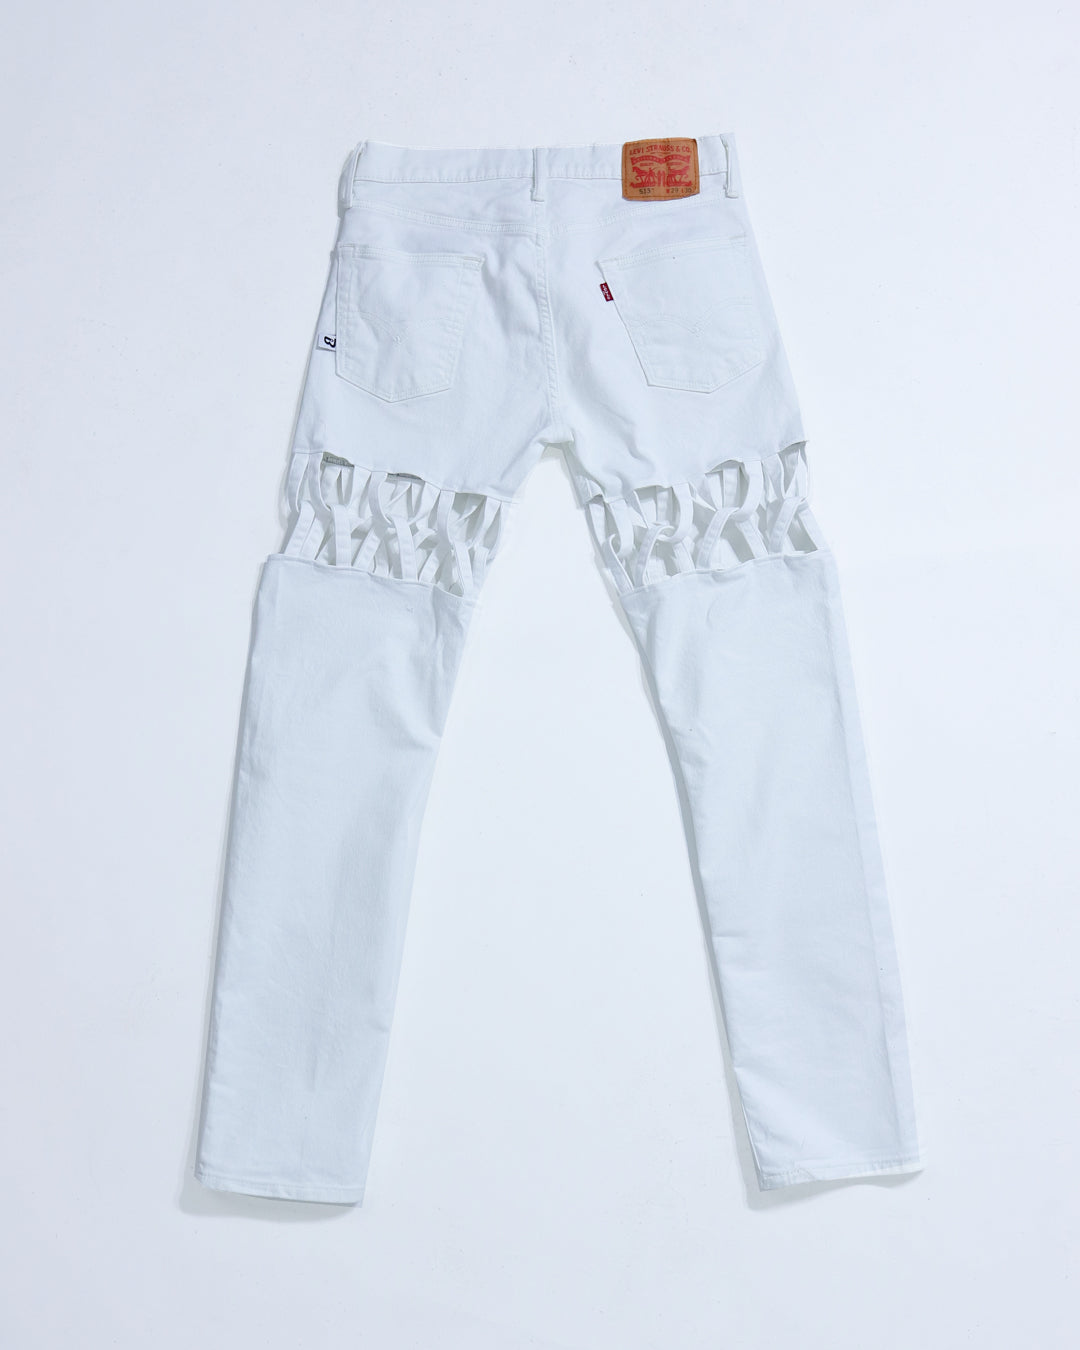 Criss Cross Jeans - White (Size 6)